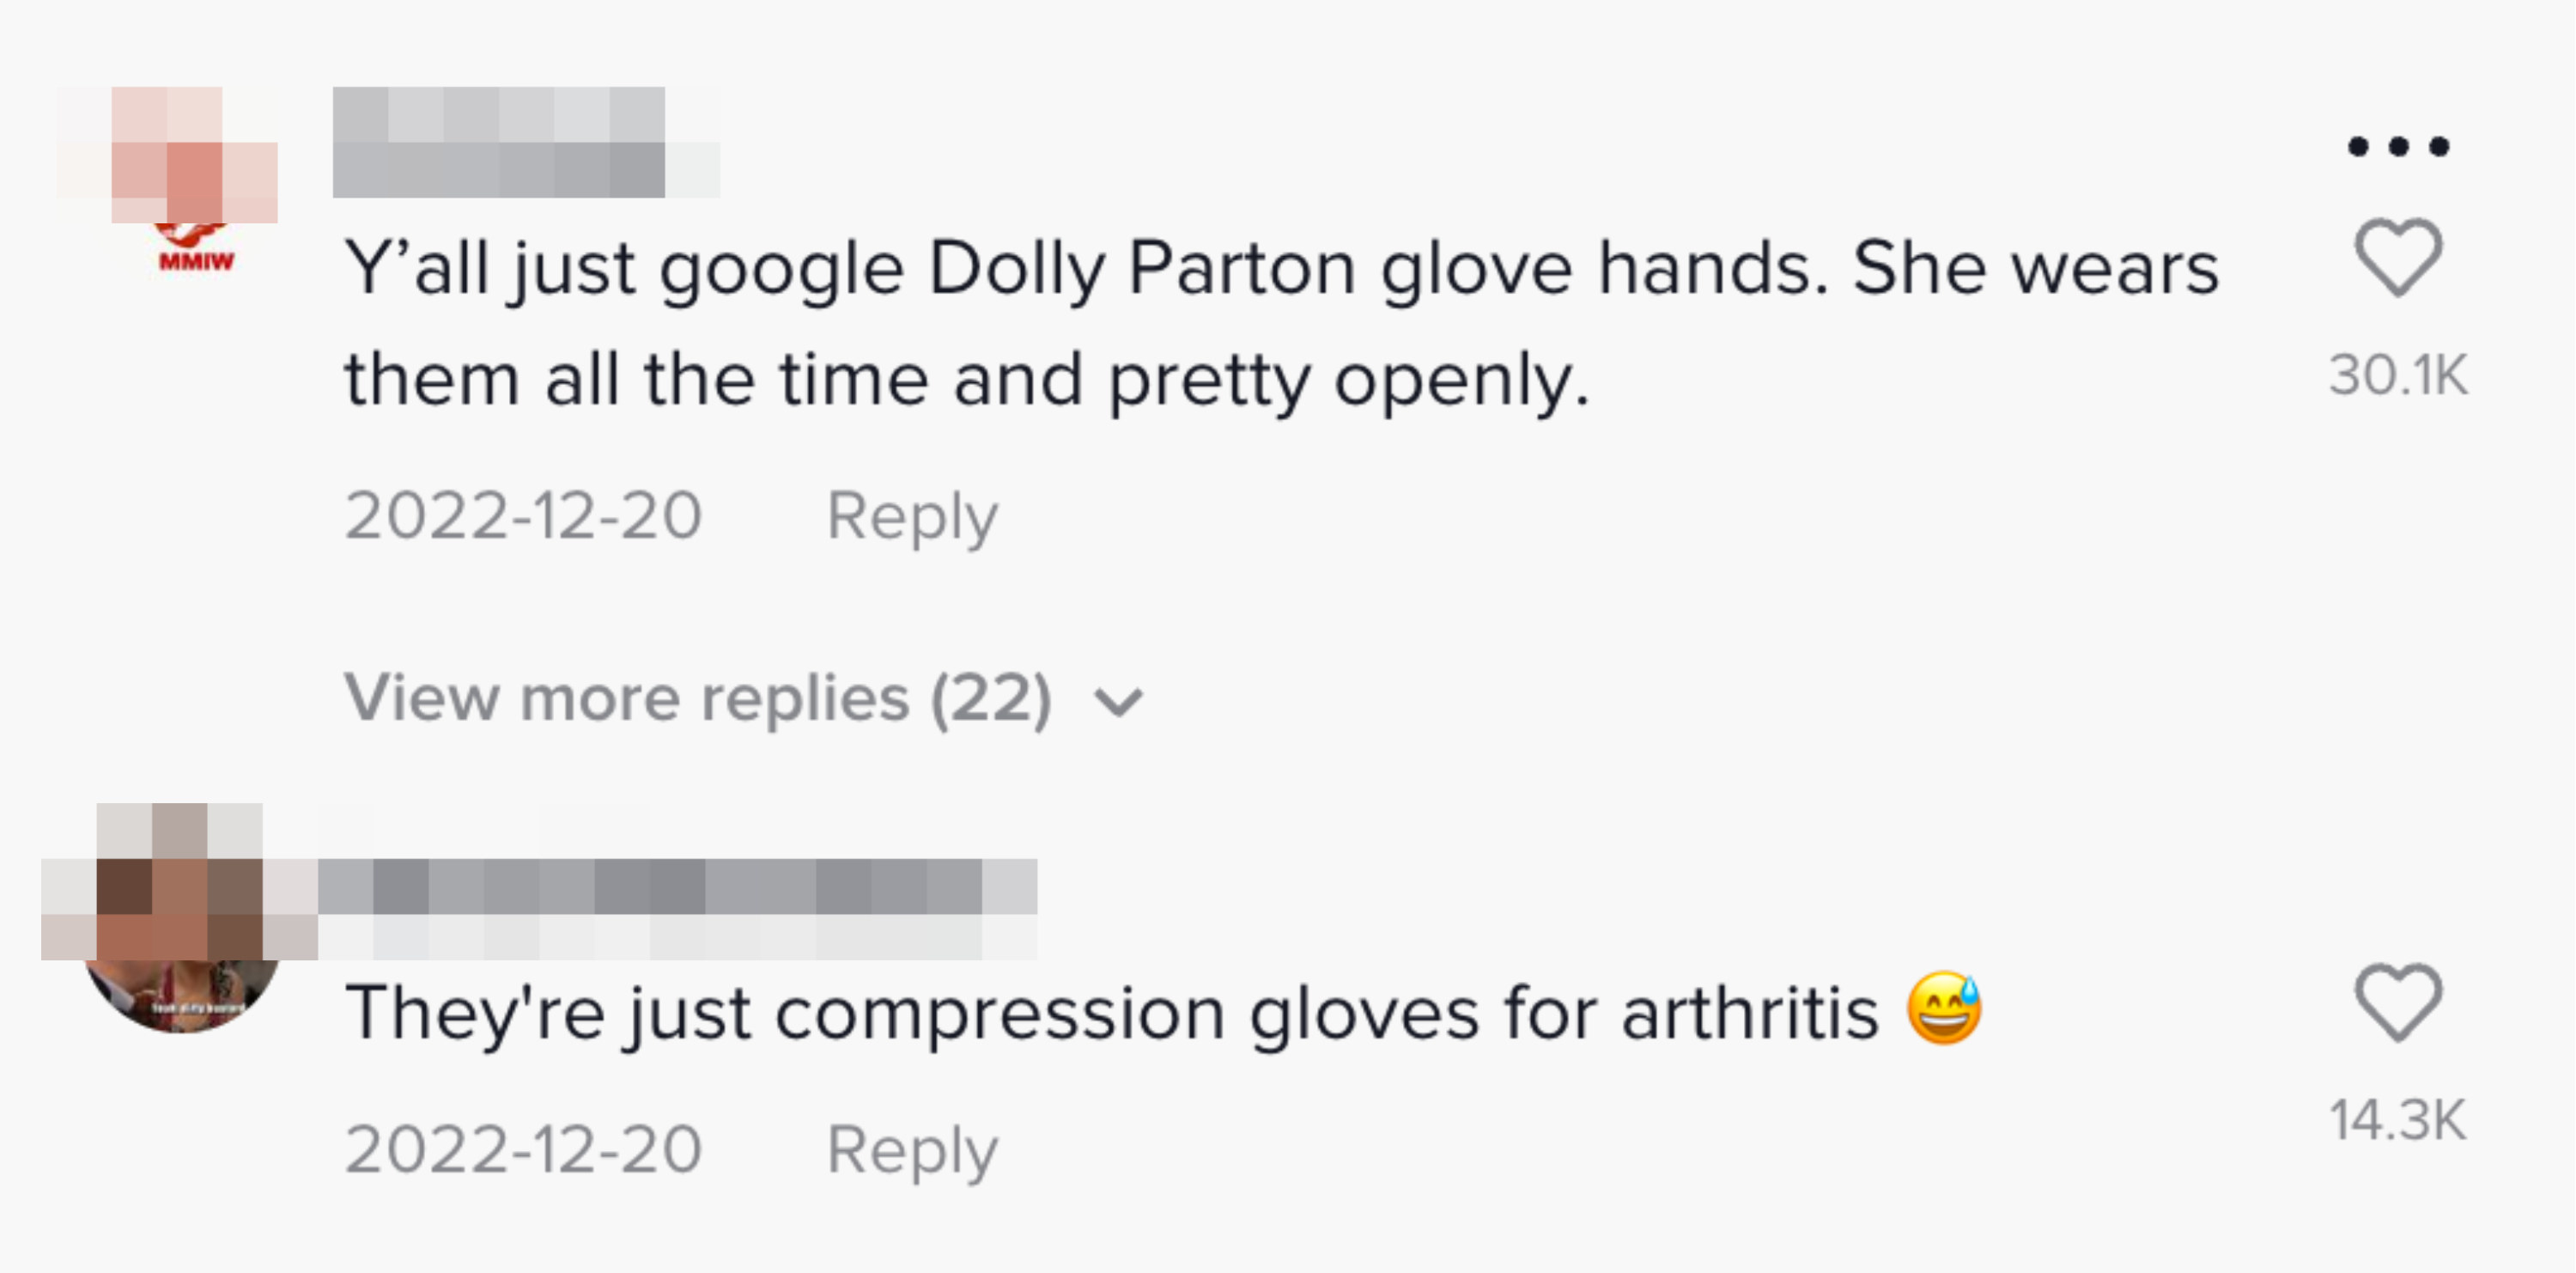 Dolly Parton Wears Gloves And People Just Realized It - 31